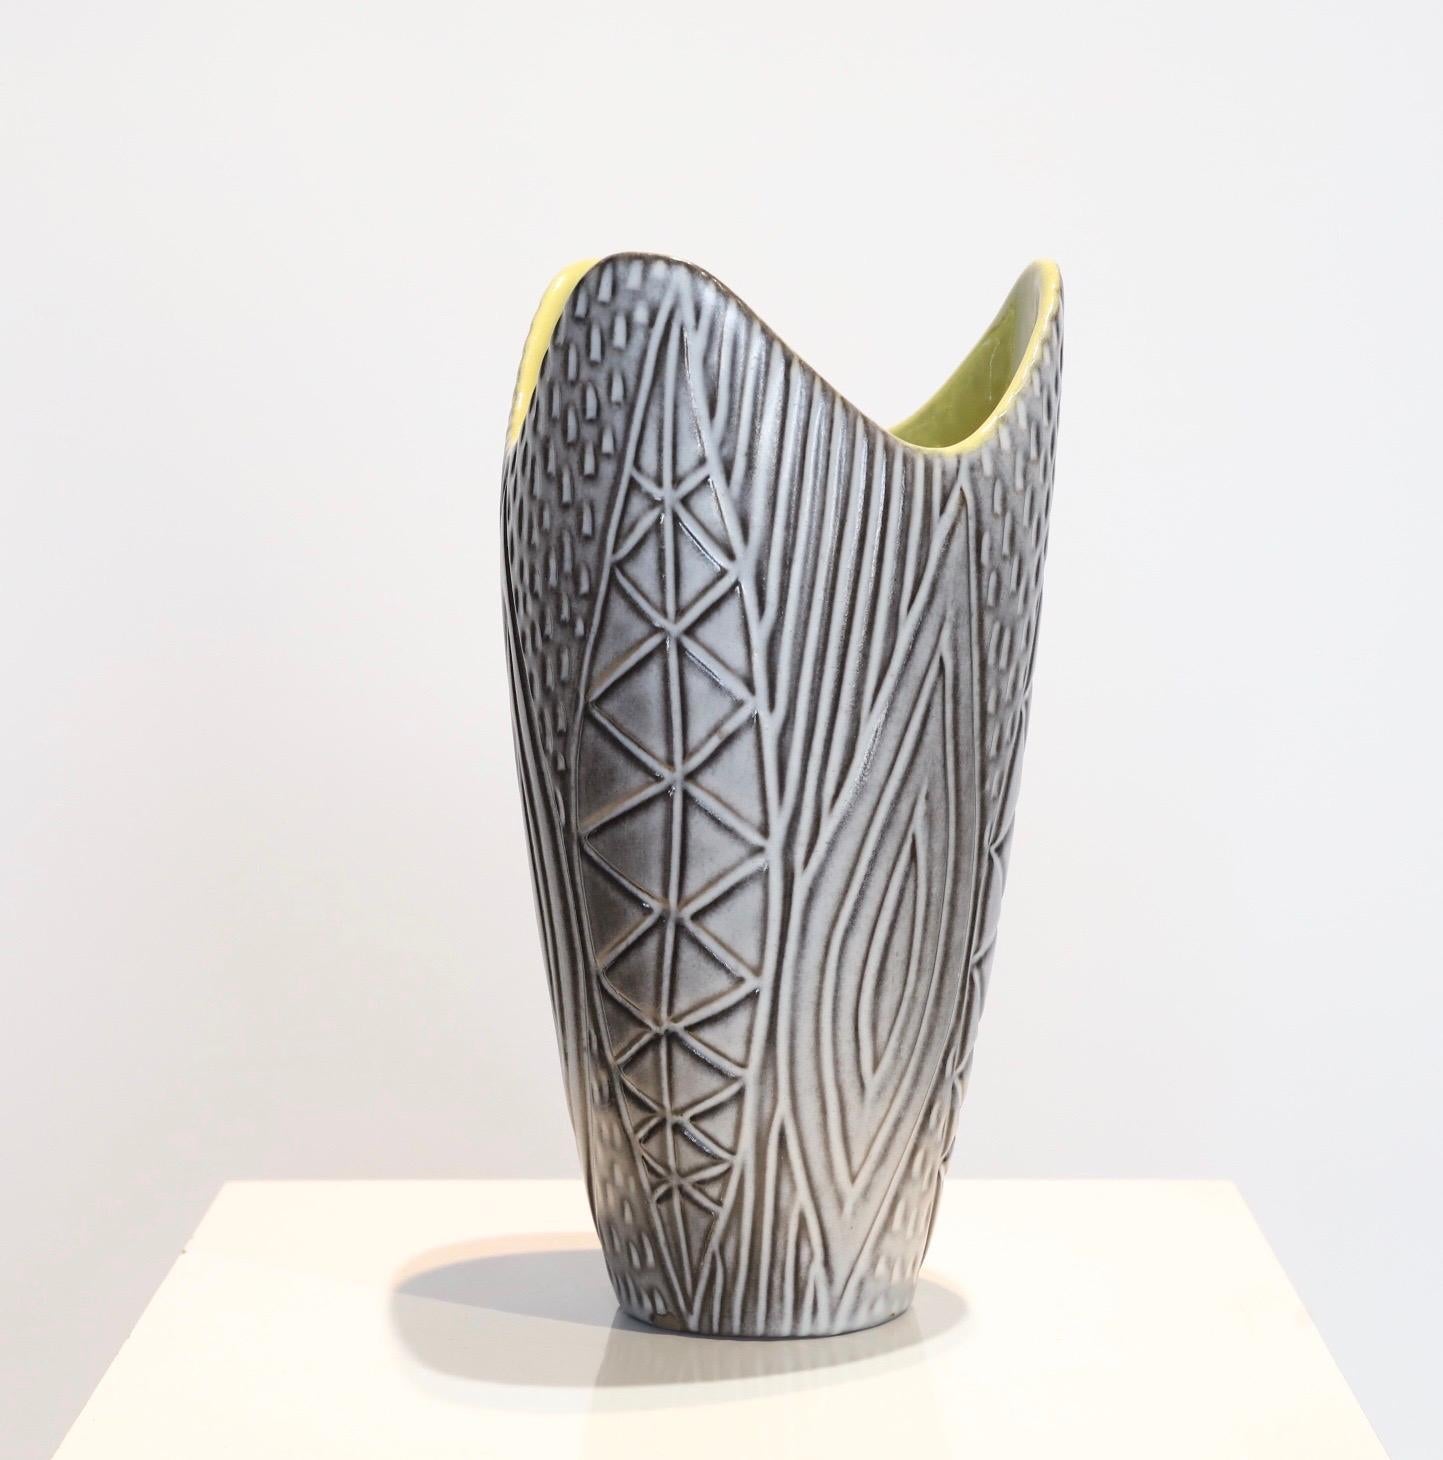 Ceramic Vase by Mari Simmulson for Upsala-Ekeby In Good Condition For Sale In Oklahoma City, OK